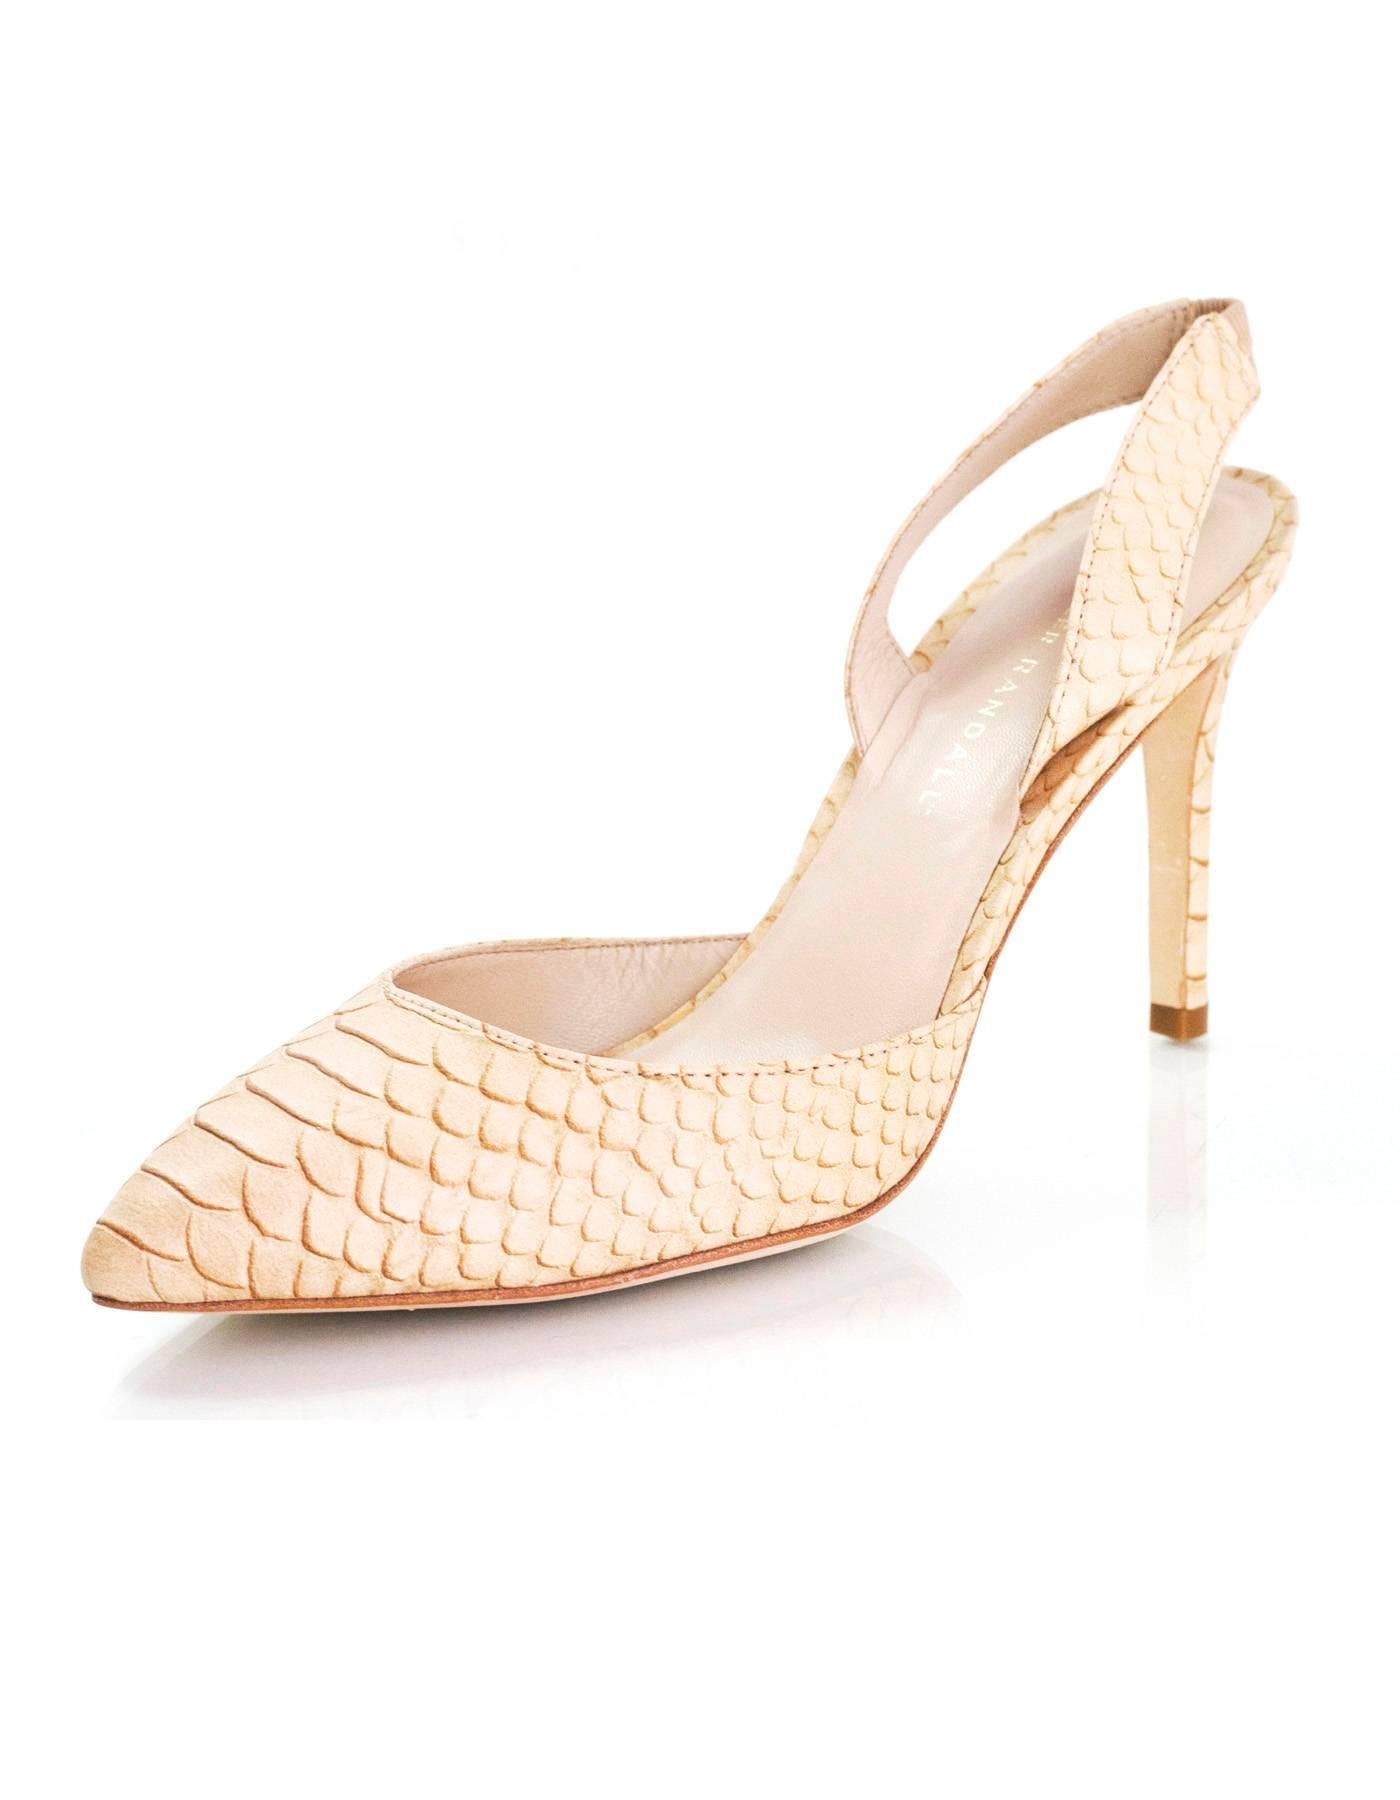 Loeffler Randall Nude Snakeskin Slingback Pumps Sz 9

Made In: Brazil
Color: Nude
Materials: Embossed leather
Closure/Opening: Slingback strap
Sole Stamp: Loeffler Randall vero cuoio 9 B
Overall Condition: Excellent pre-owned condition, minor wear